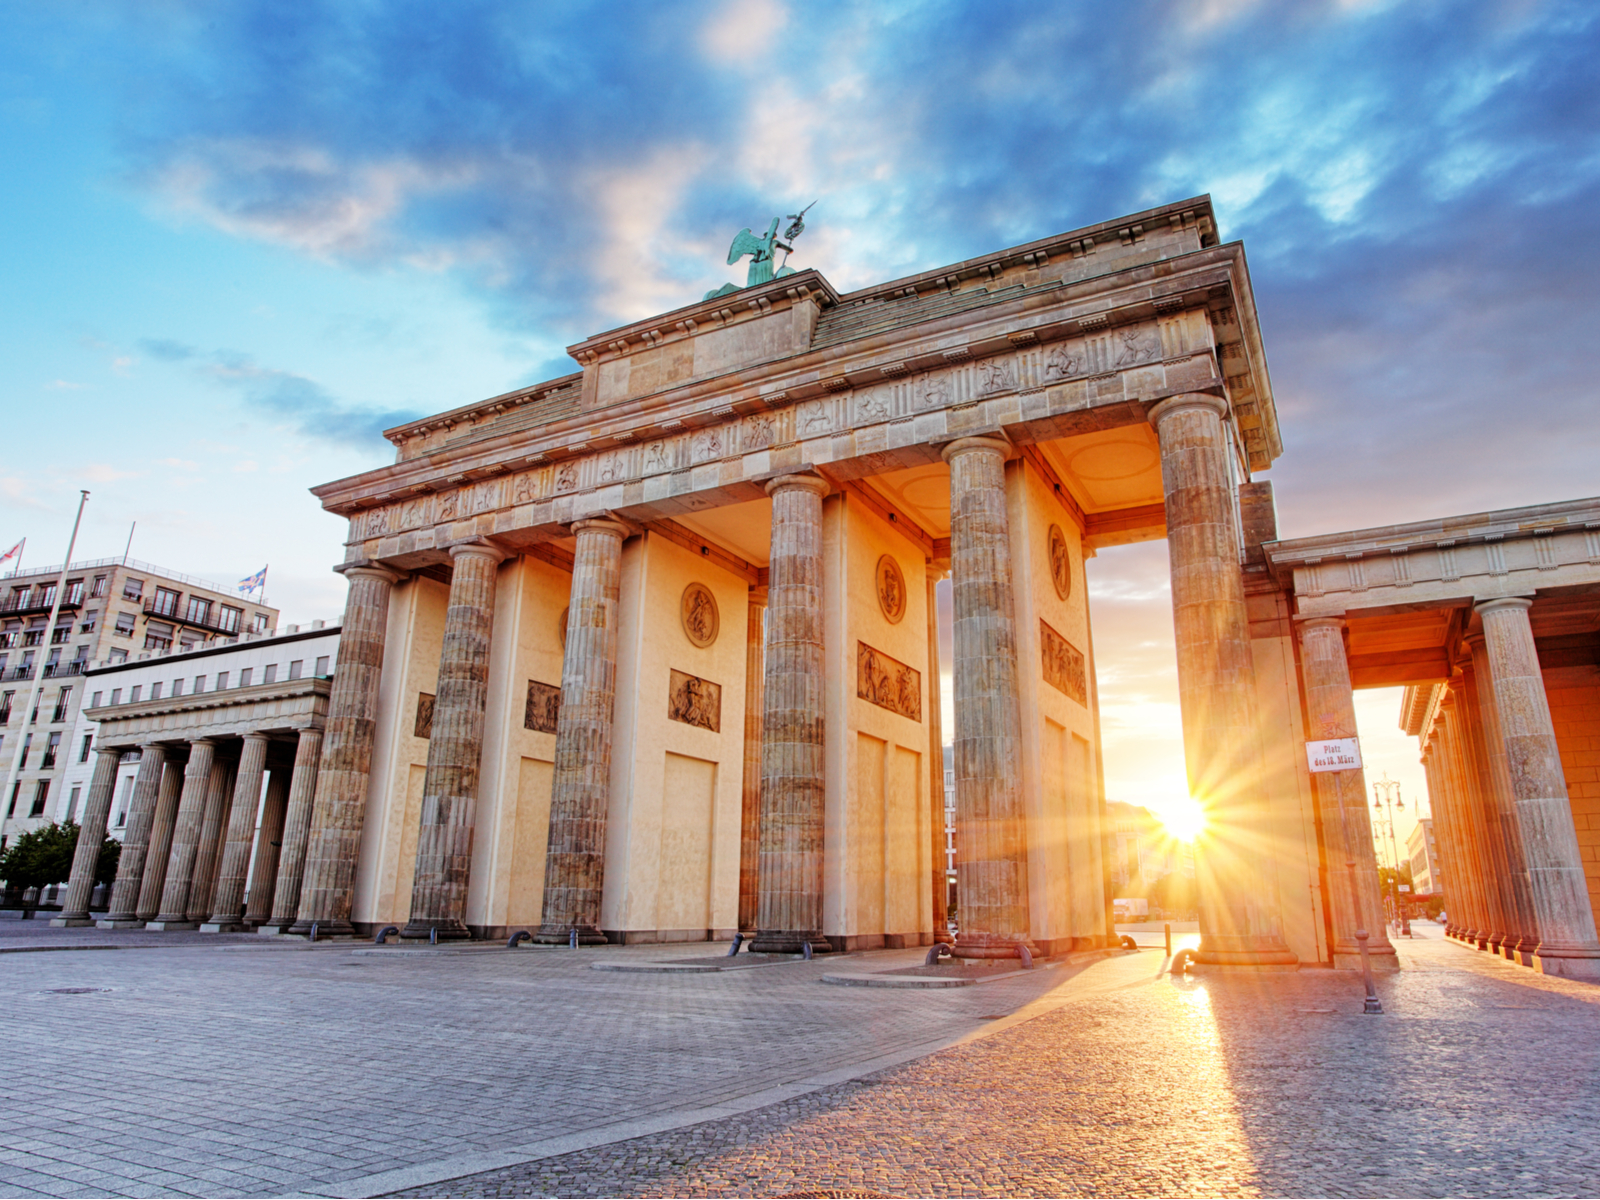 Brandenburg Gate with sun in the background peeking through the columns during the best time to visit Germany